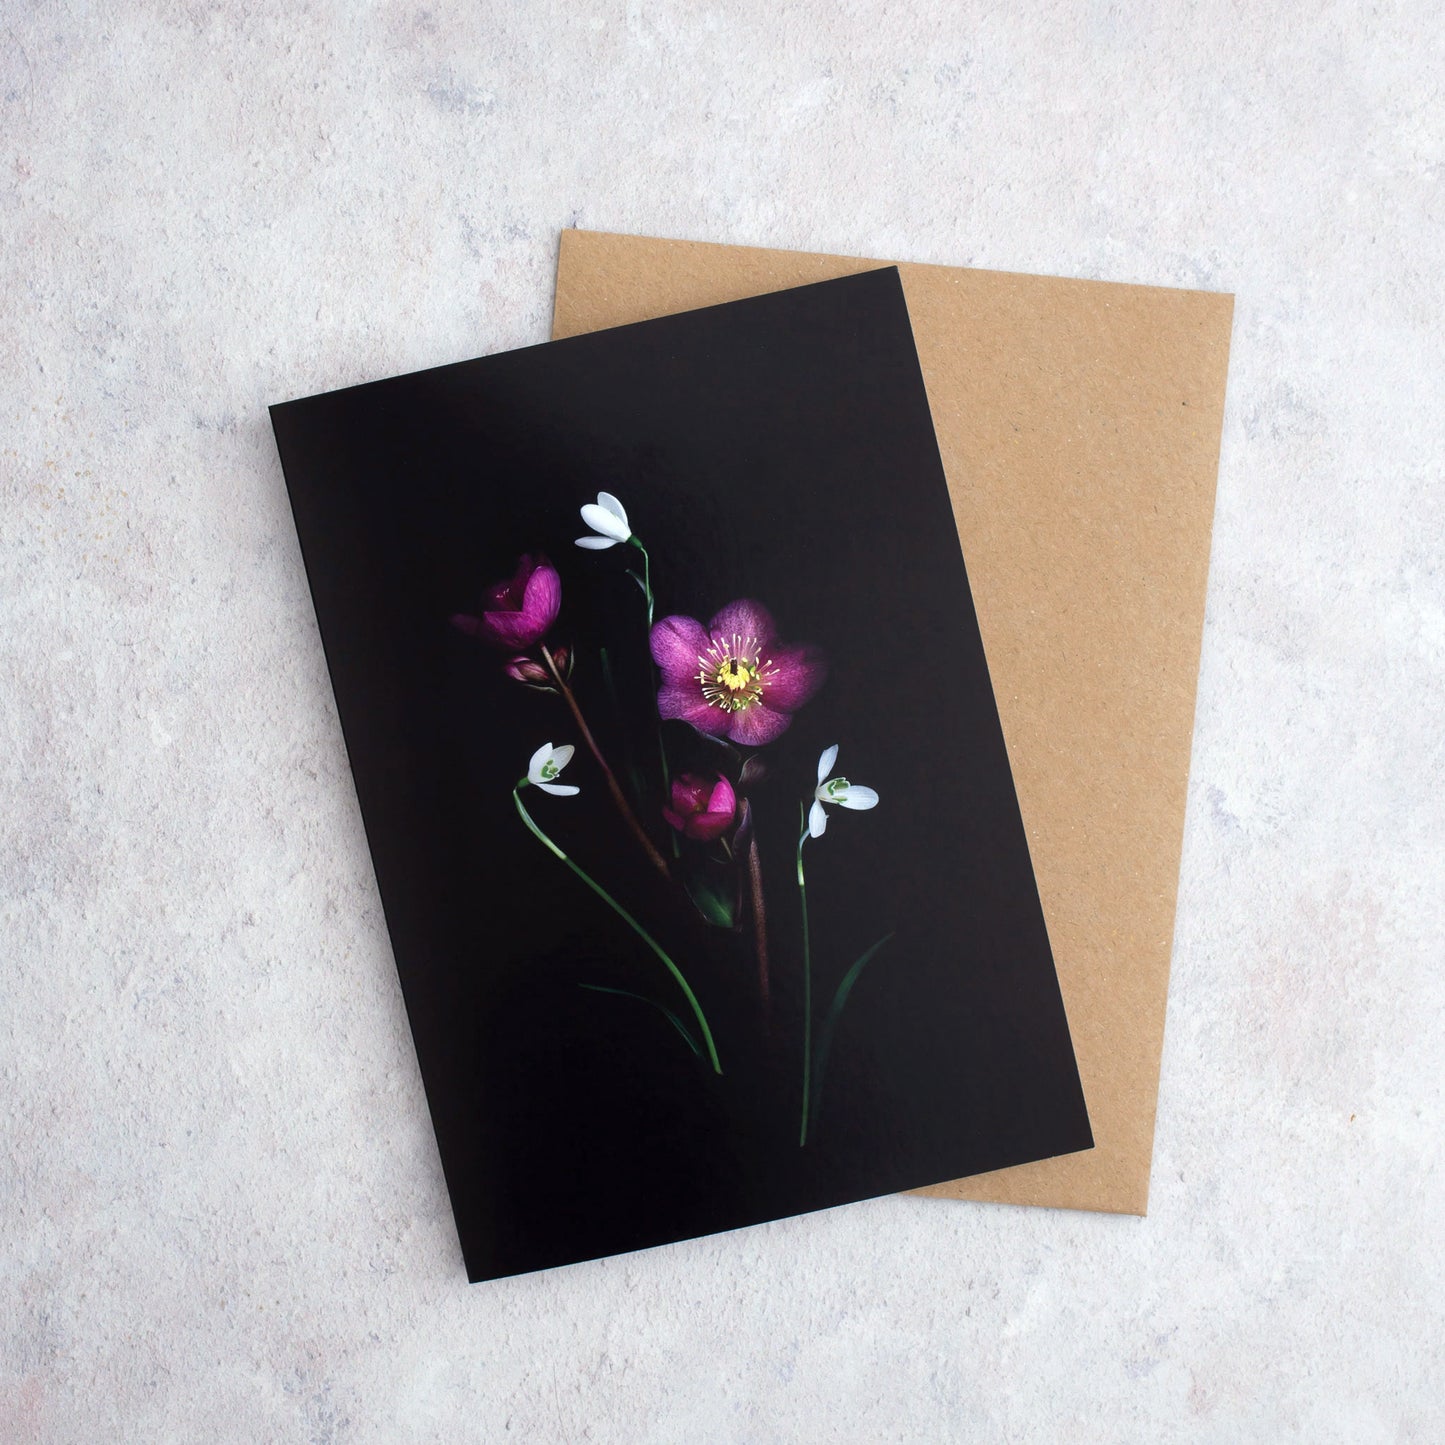 Botanical greeting card with Snowdrops and Hellebores  photographed on a black background.